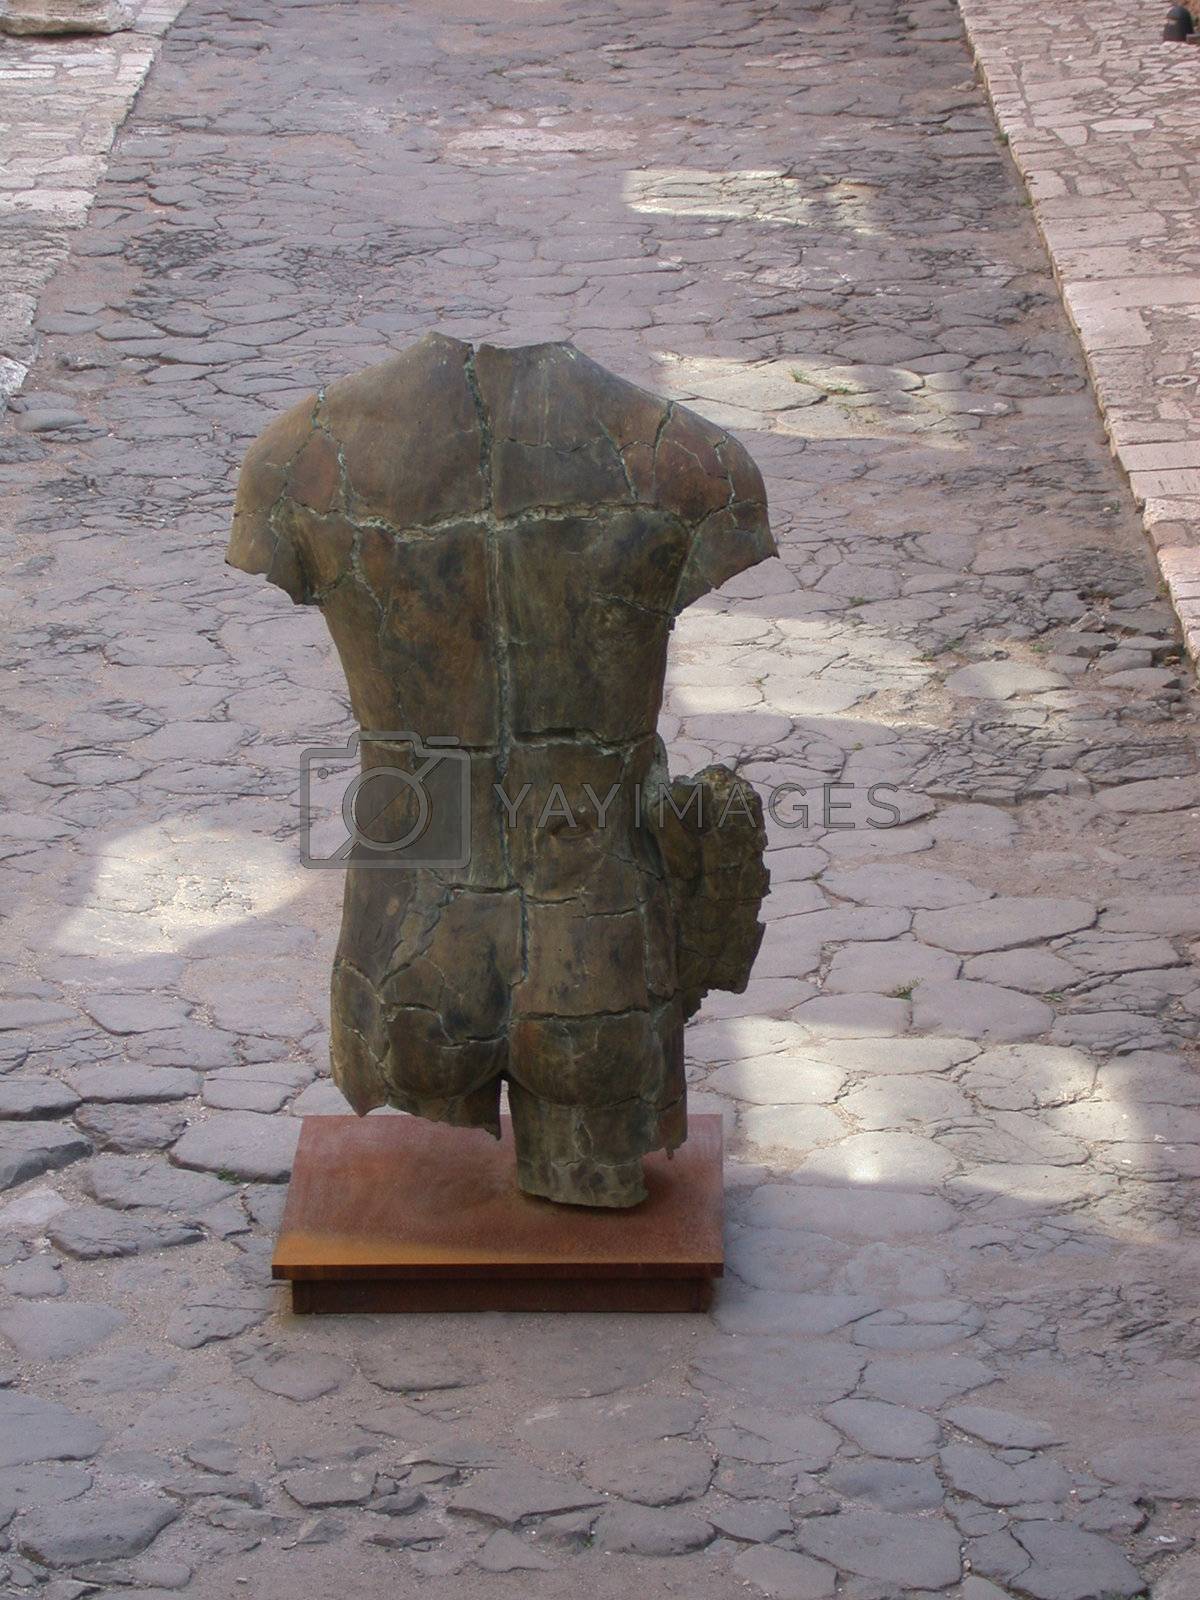 Royalty free image of Roman torso by windmill